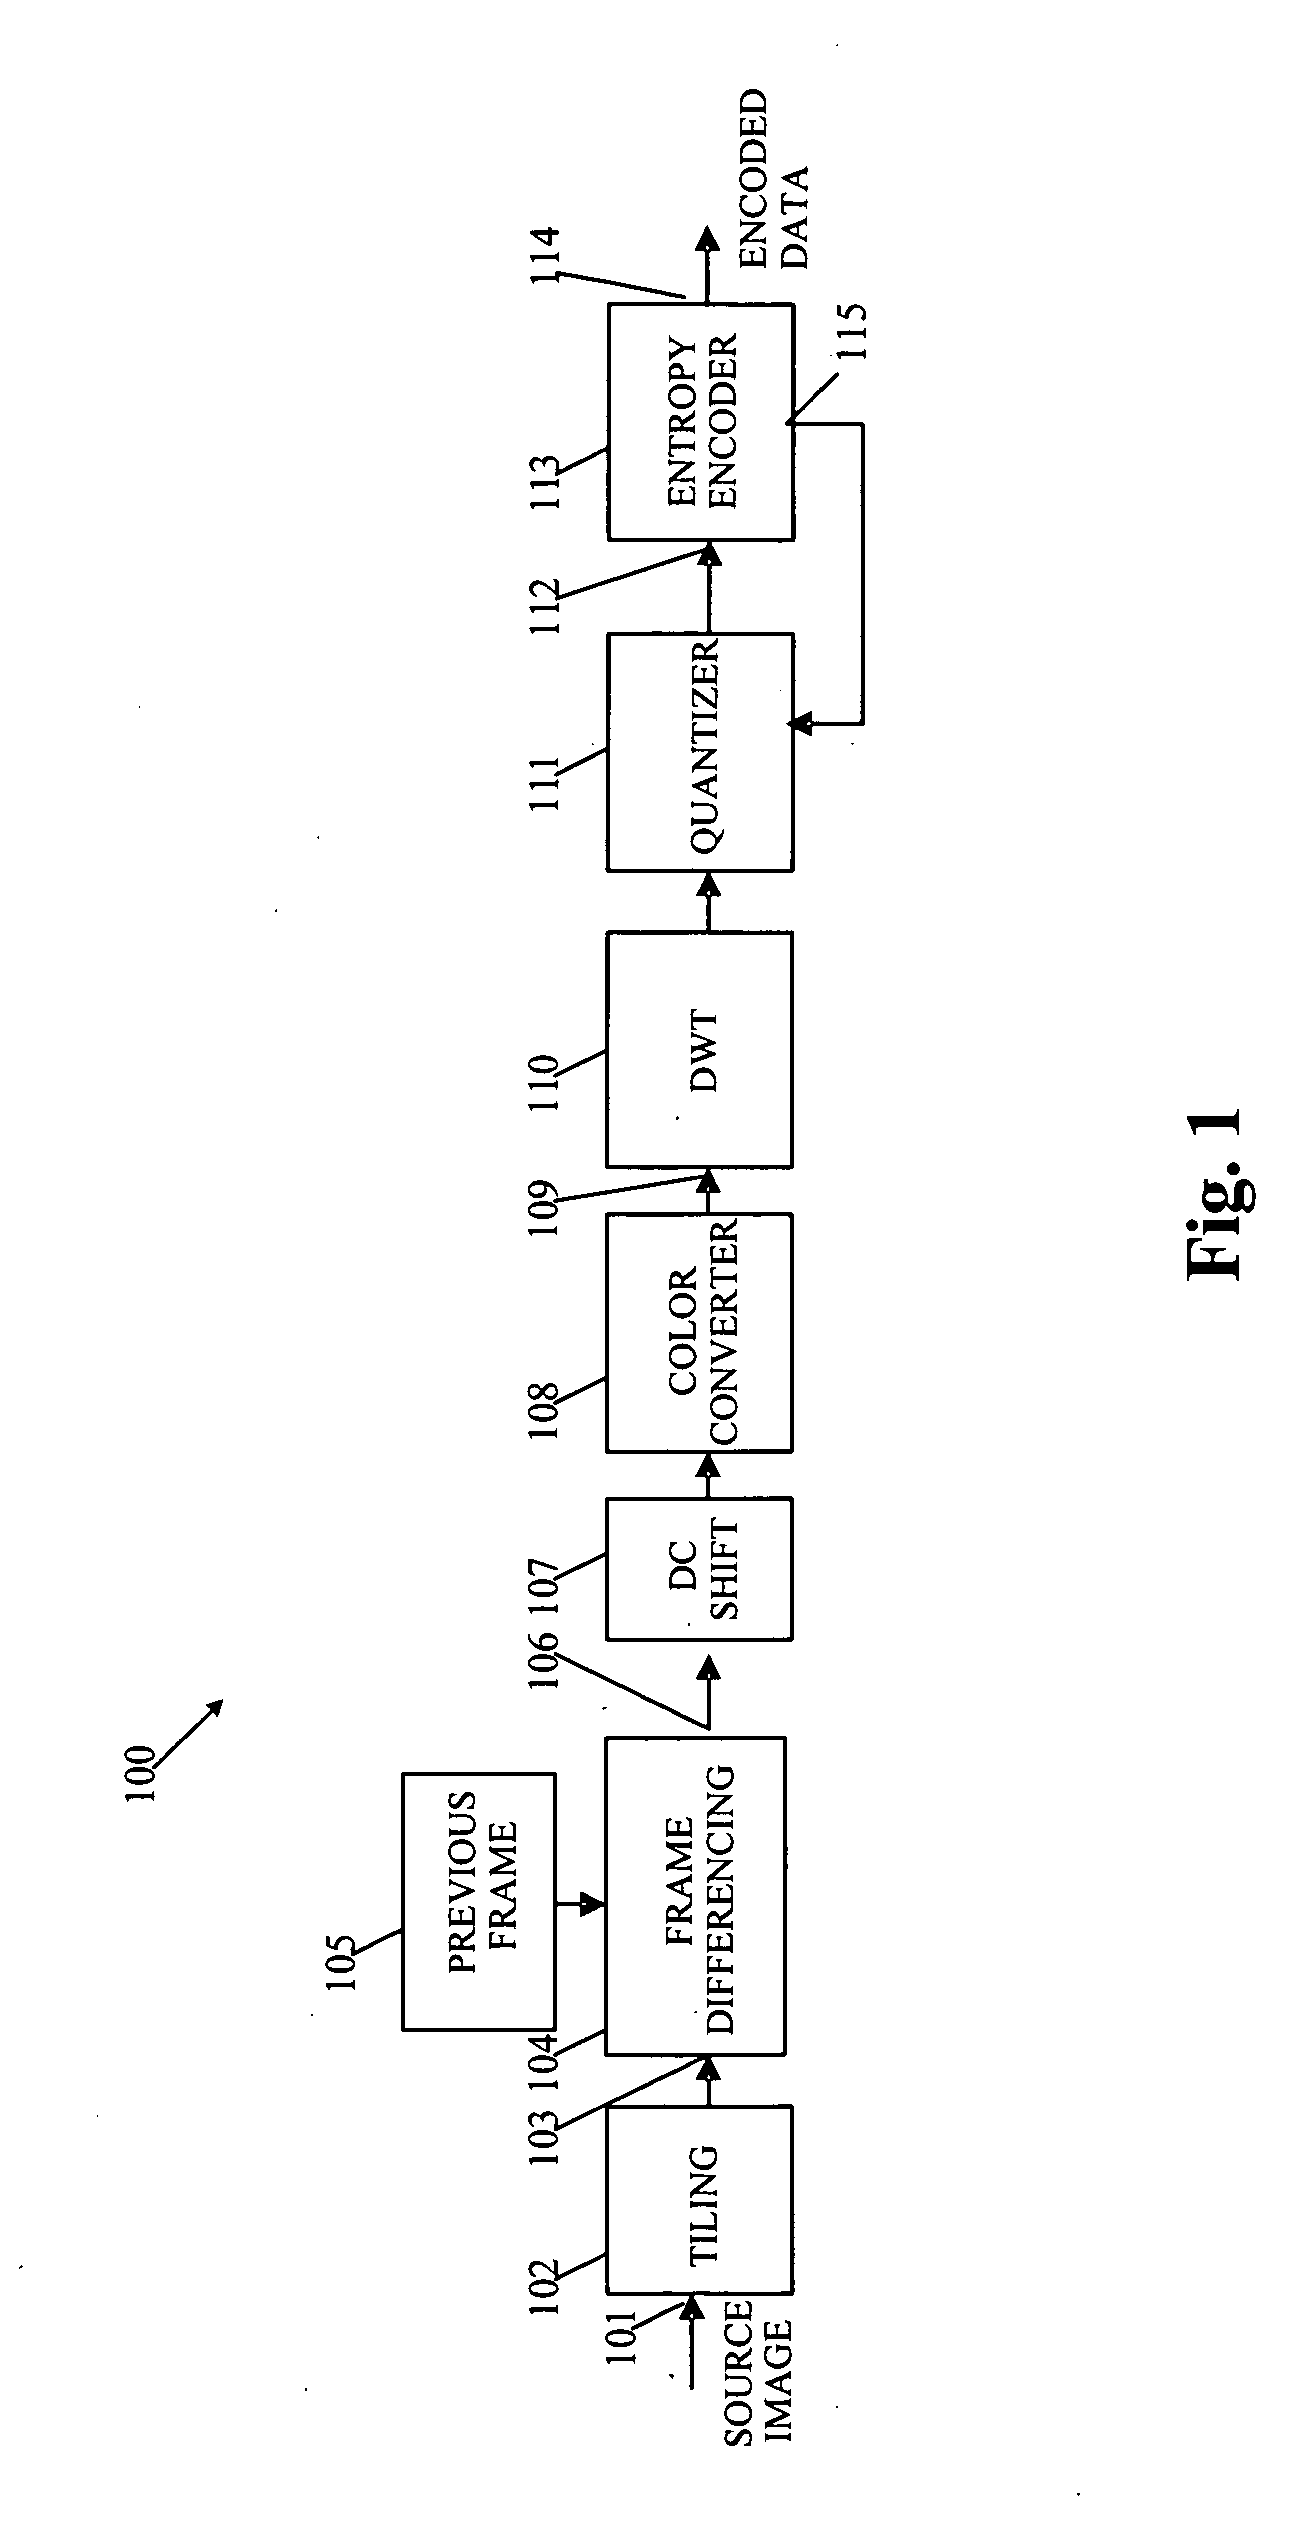 System and method for effectively encoding and decoding electronic information